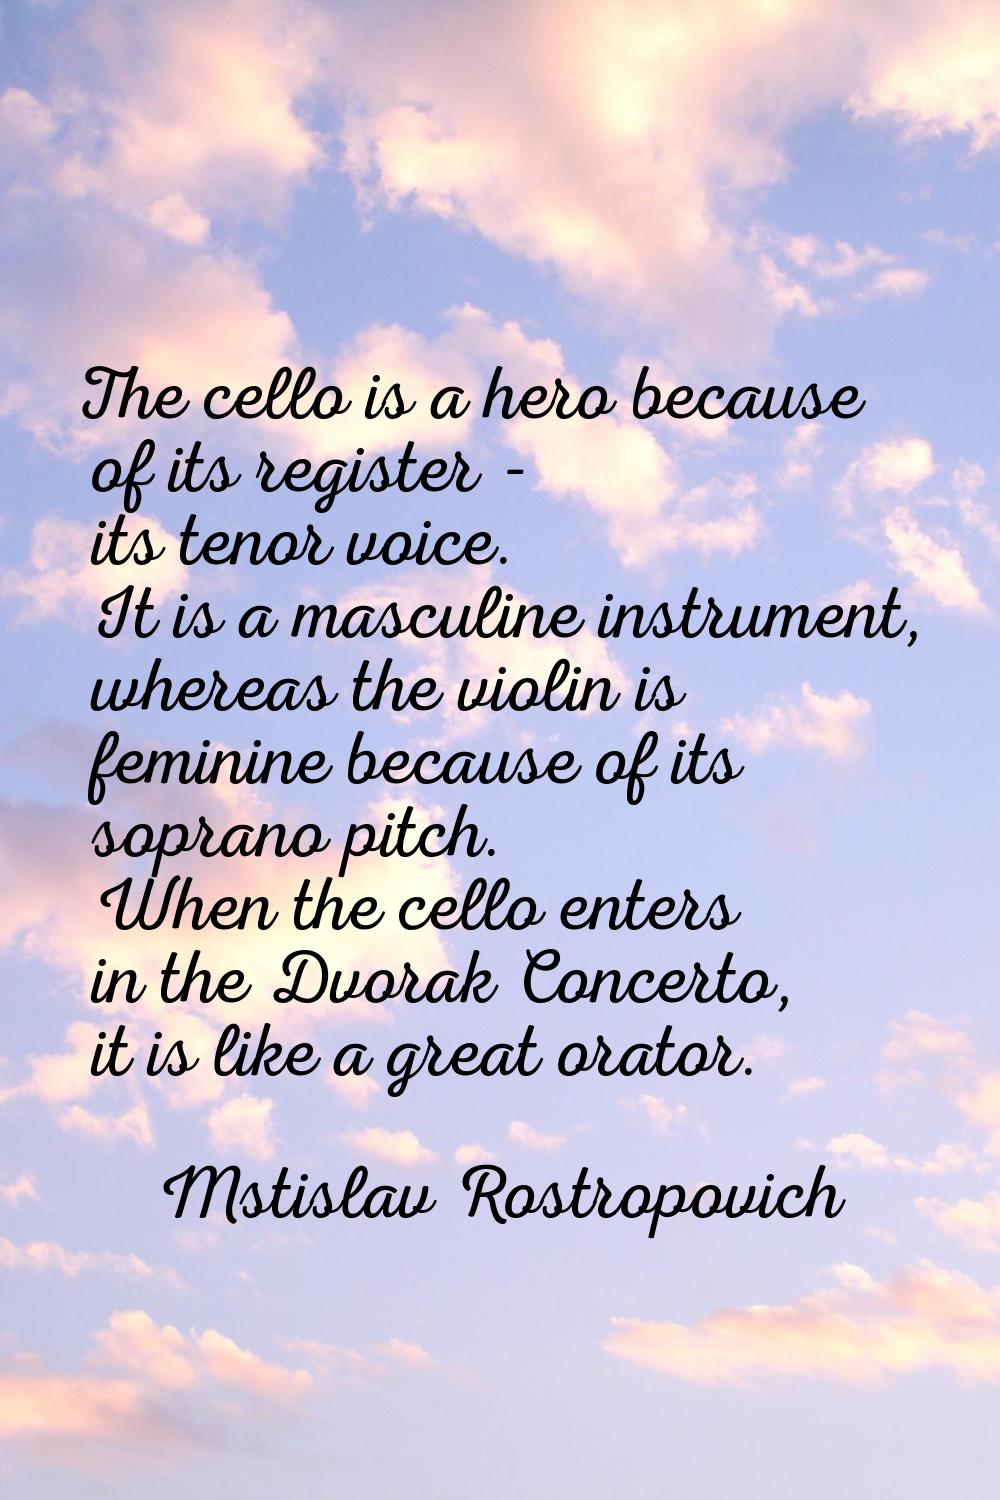 The cello is a hero because of its register - its tenor voice. It is a masculine instrument, wherea